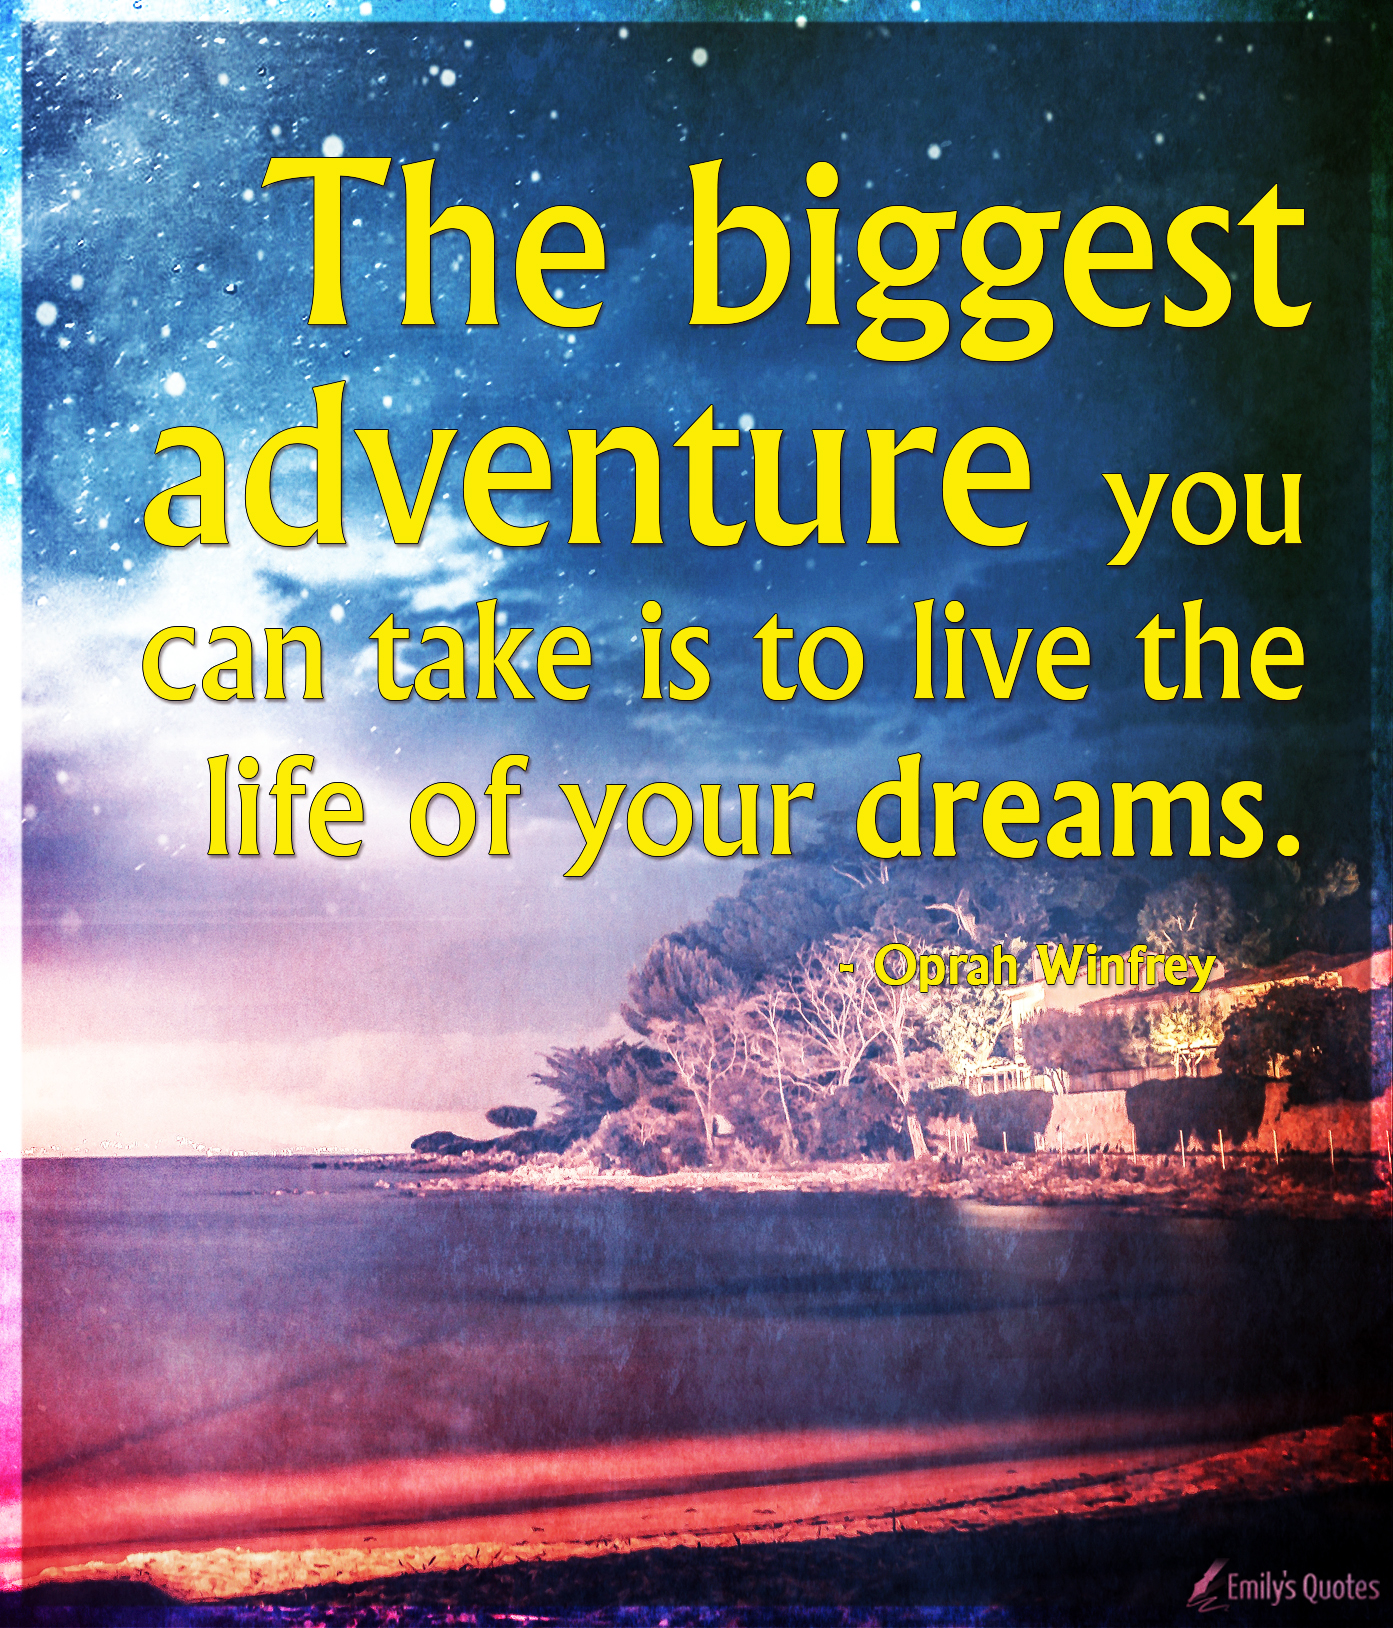 The biggest adventure you can take is to live the life of your dreams ...